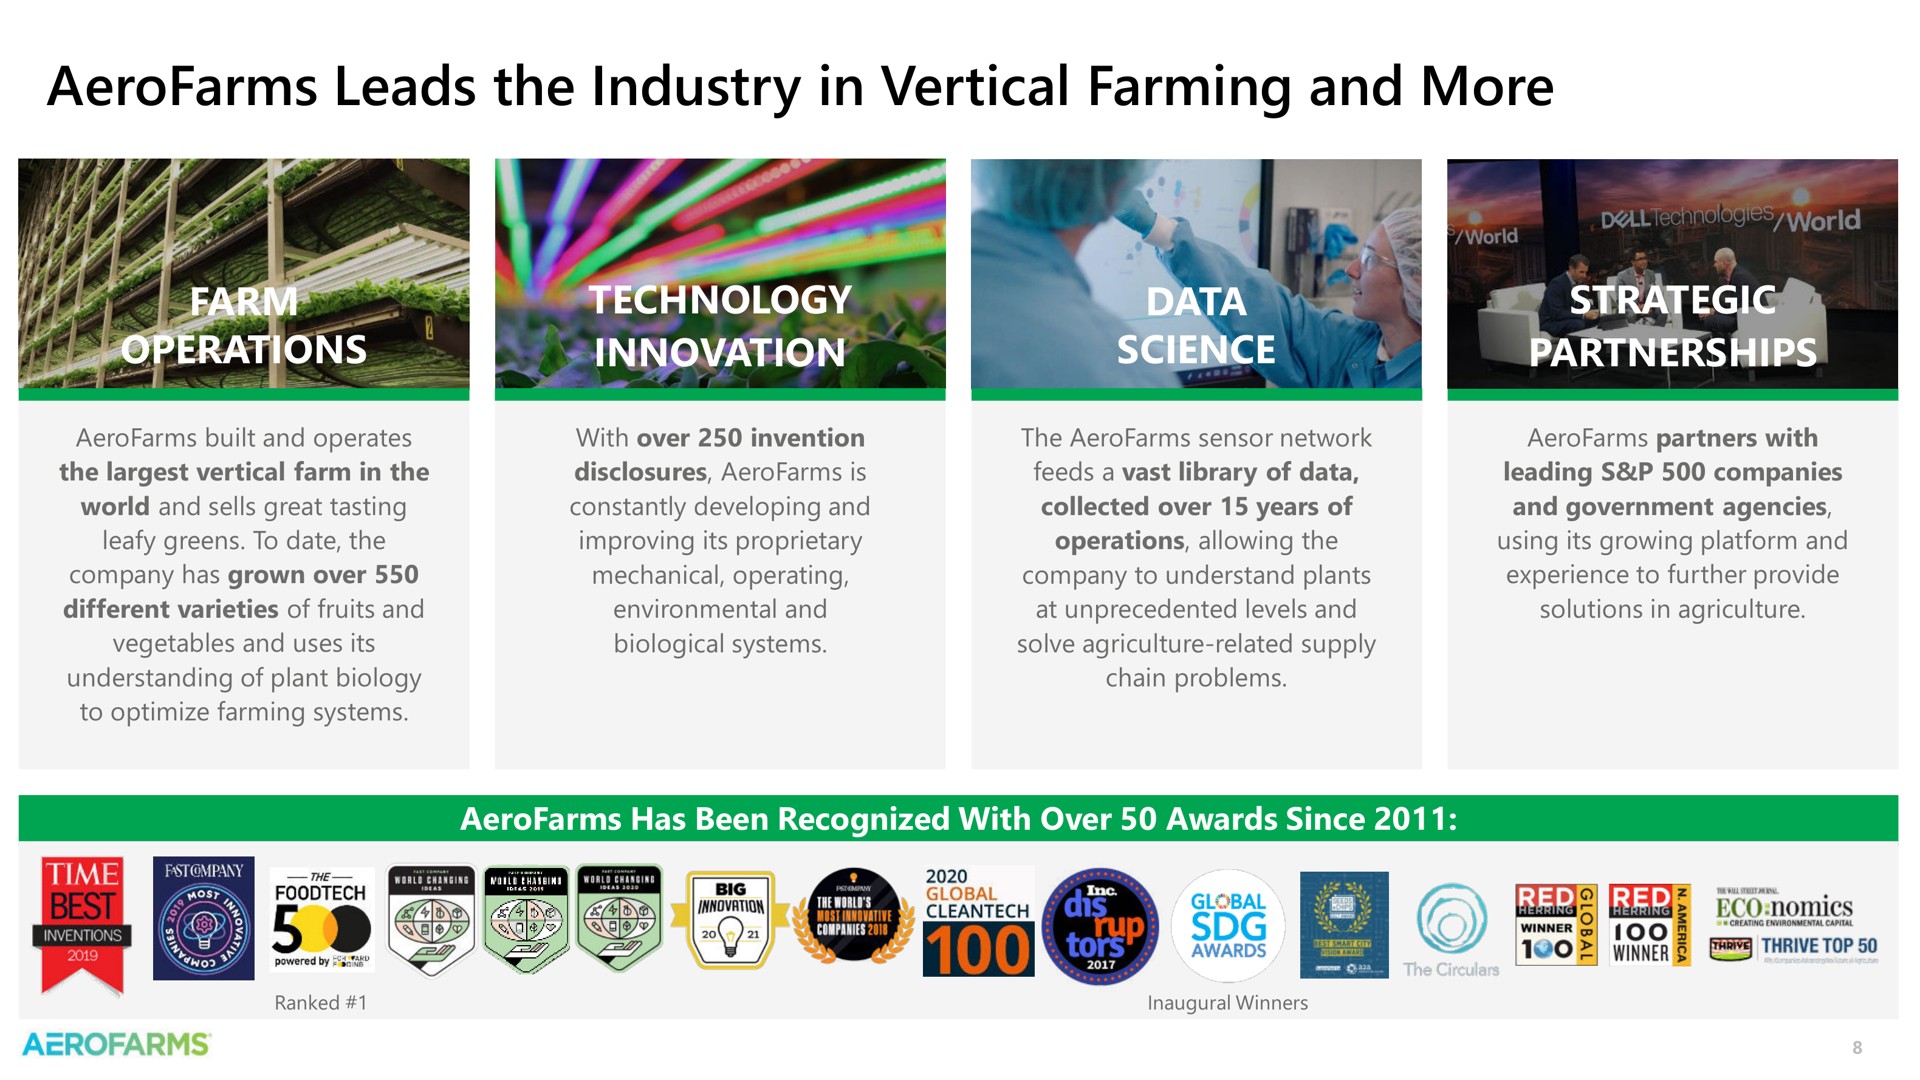 leads the industry in vertical farming and more technology | AeroFarms